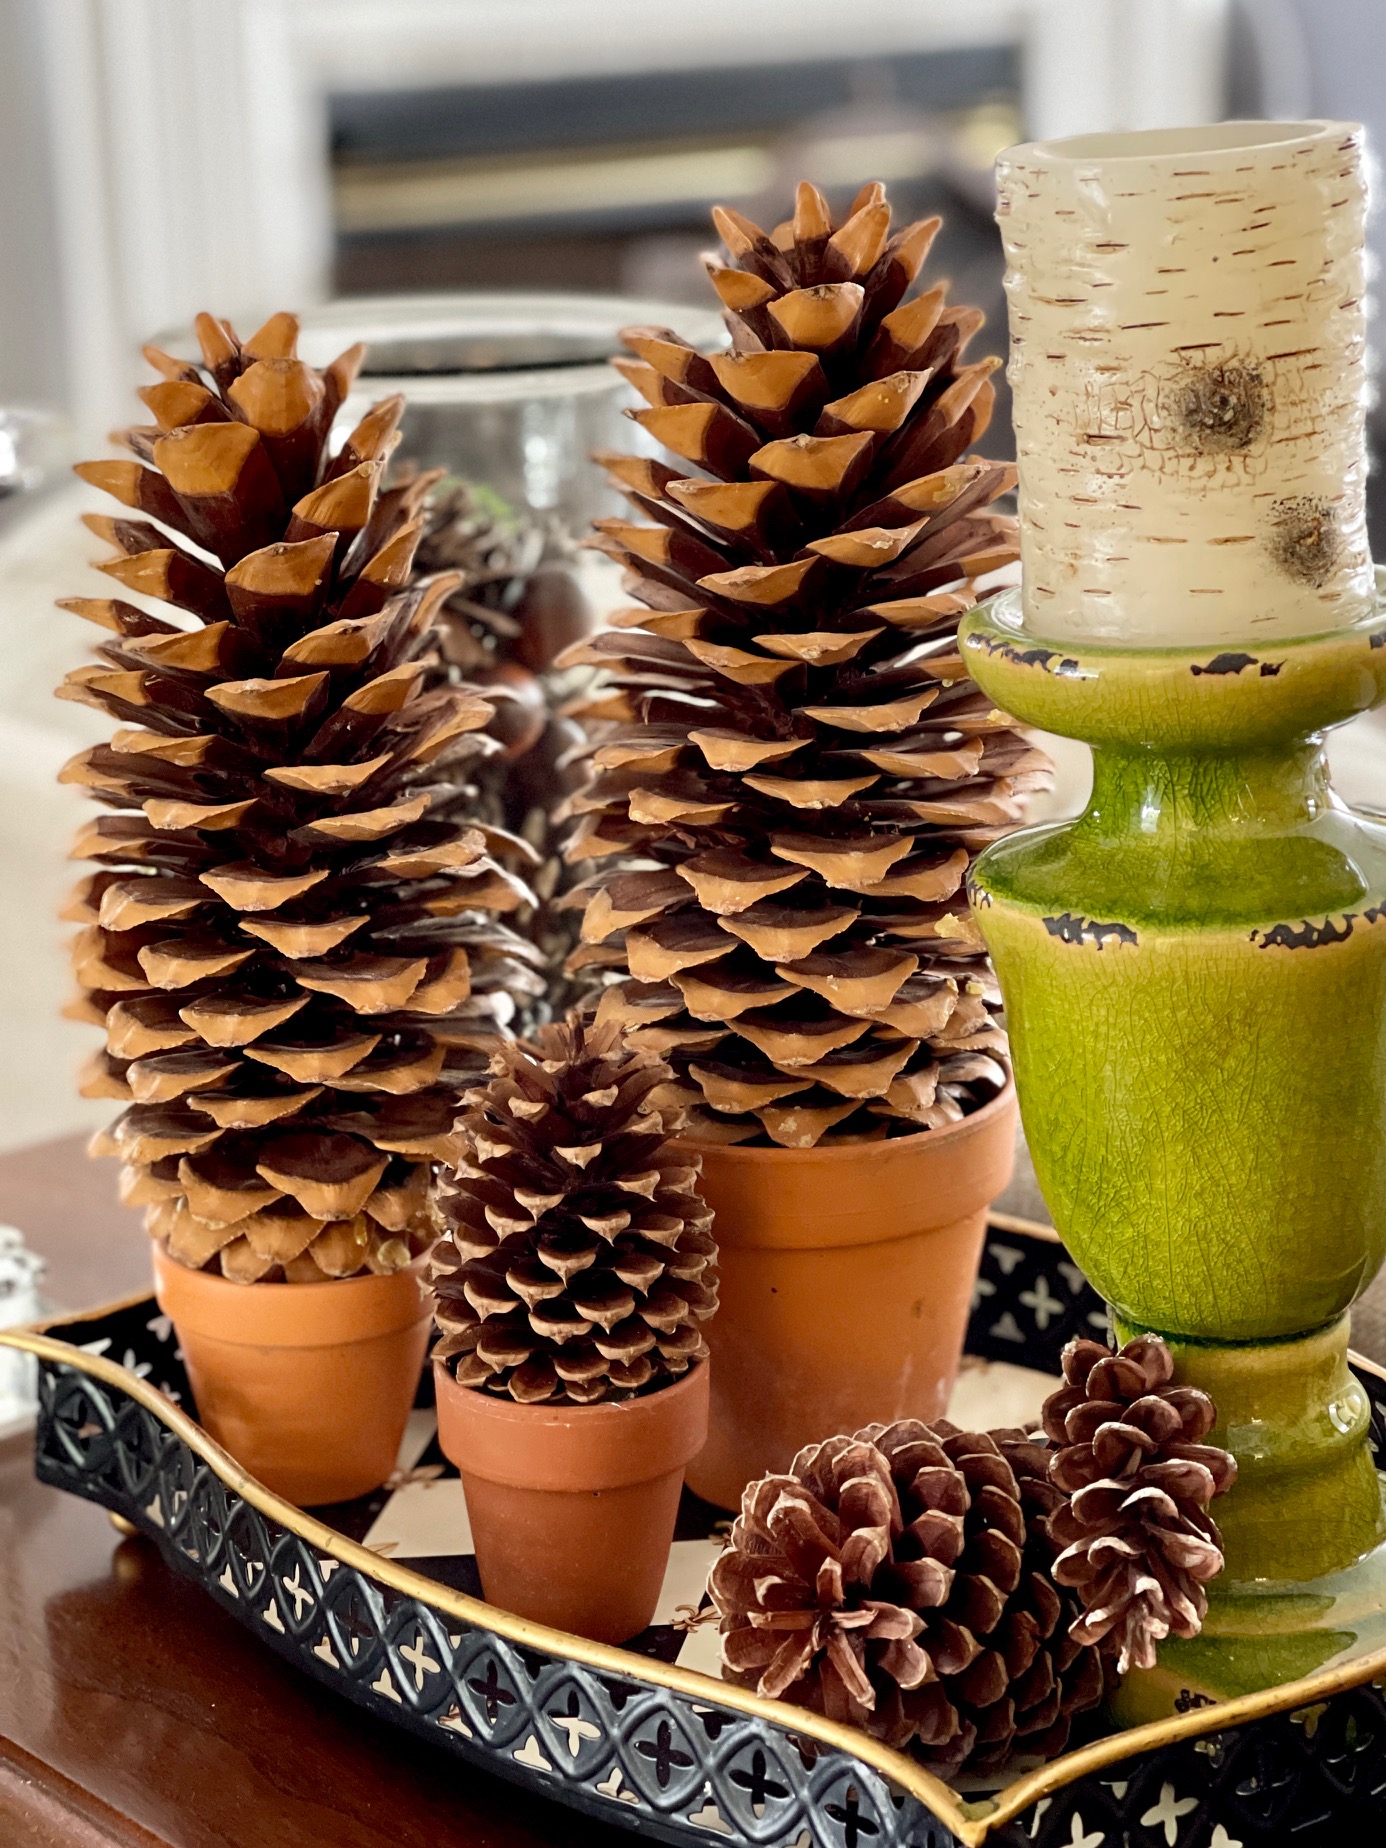 40 awesome pinecone crafts and projects - A girl and a glue gun